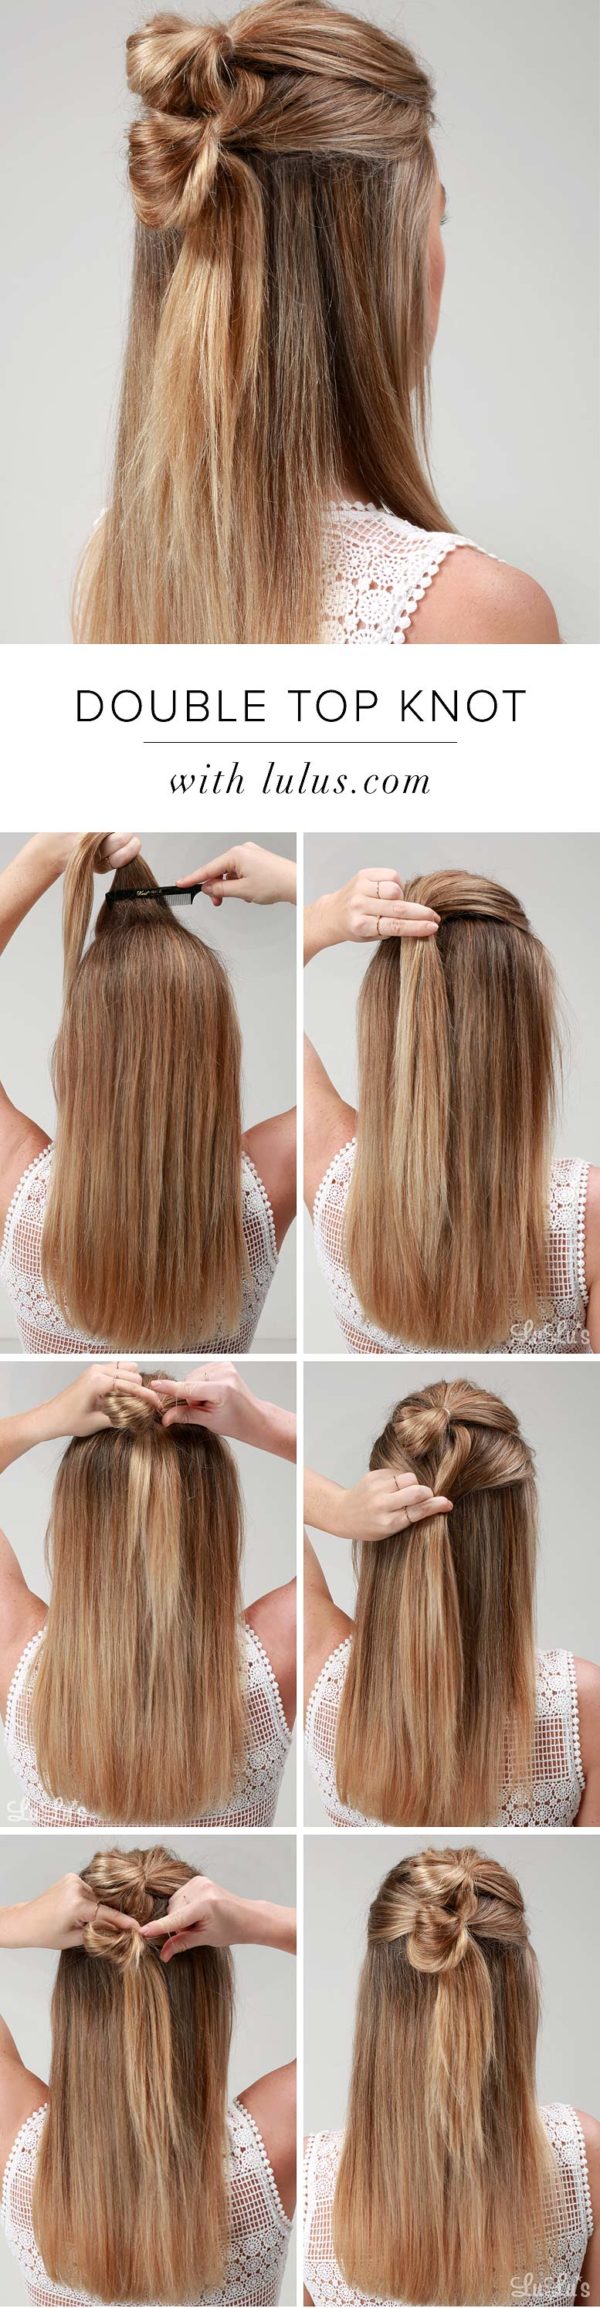 Never Easier: 10 Hairstyles Ready For Less Than 5 Minutes